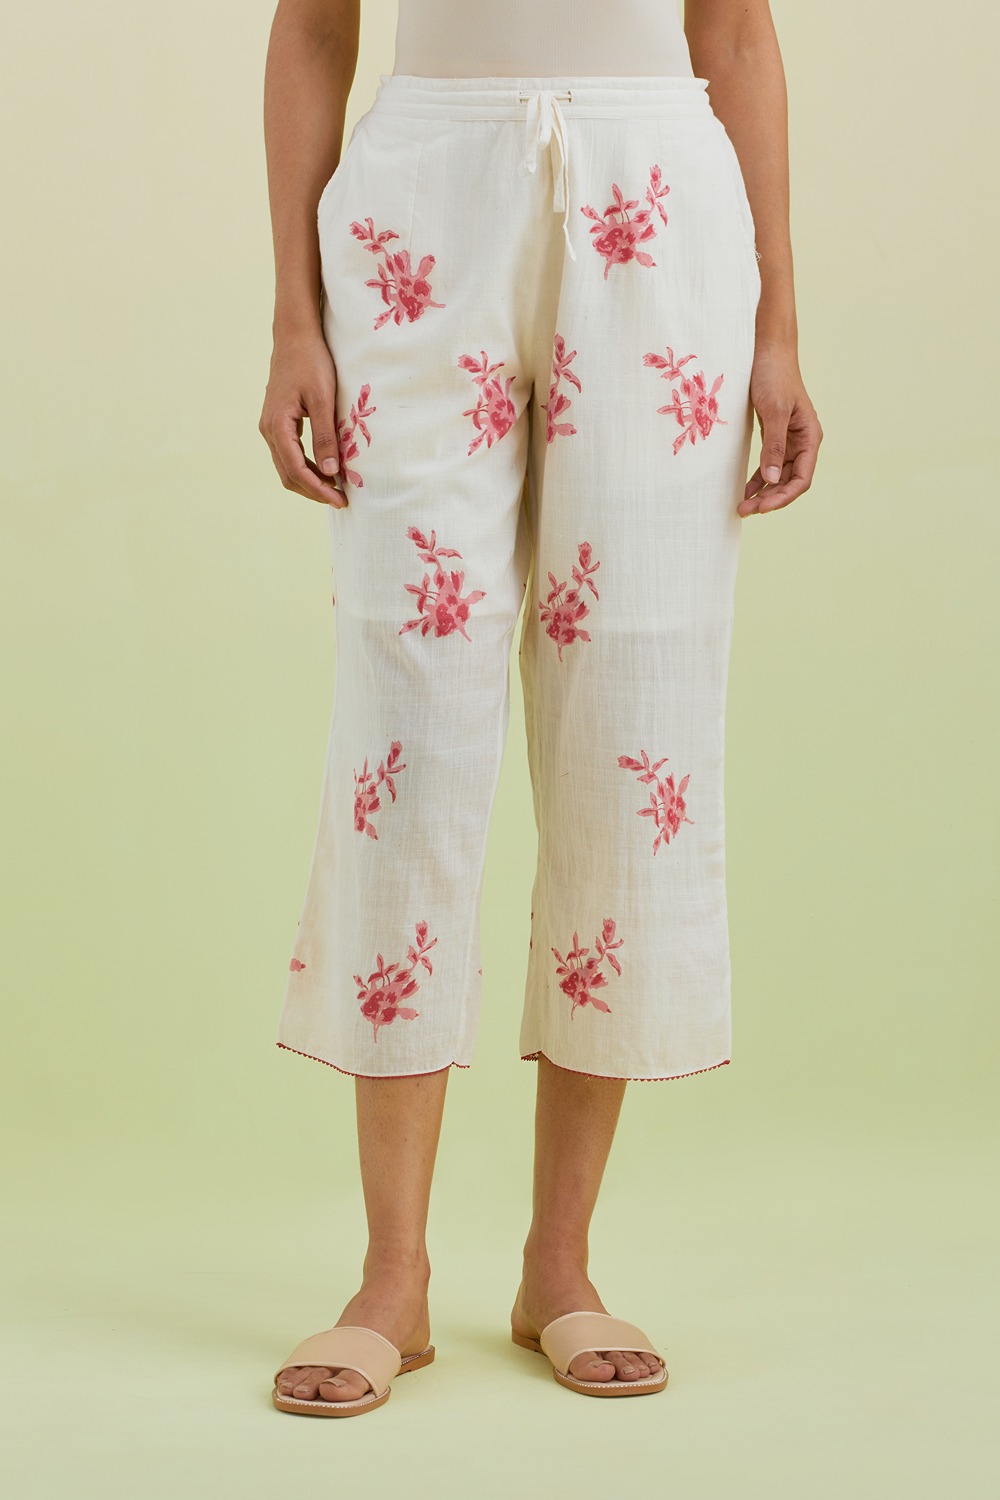 Off White Straight Ankle Length Pants With All-Over Pink Colored Floral Boota Hand-Block Print